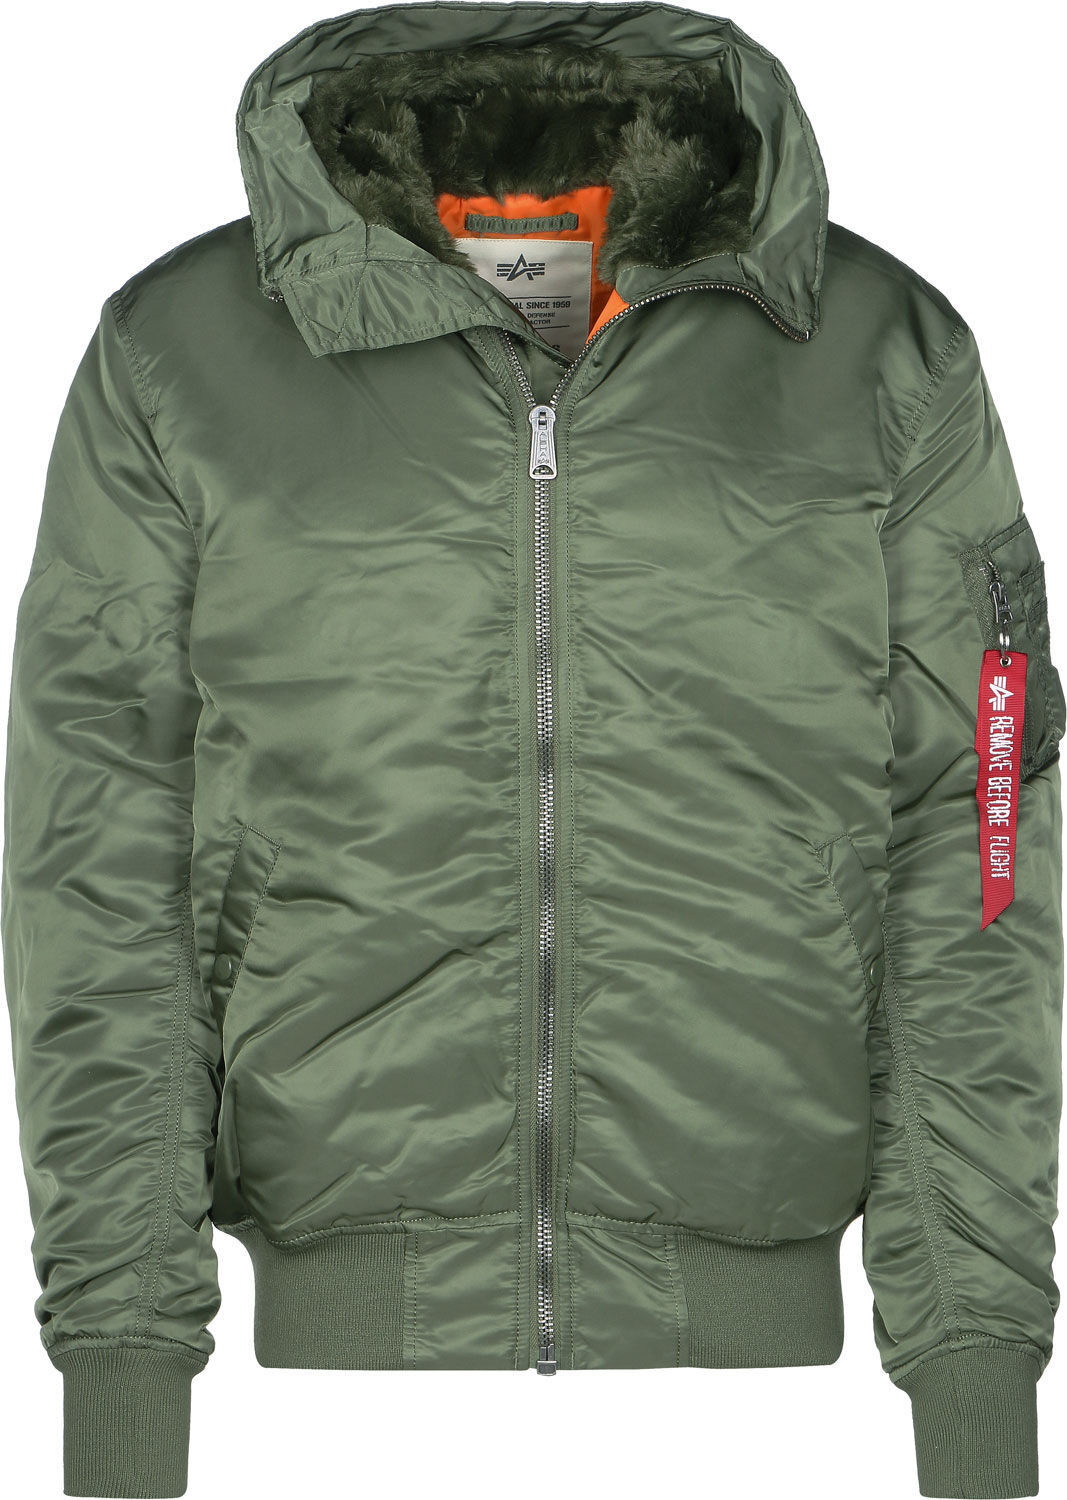 Buy Alpha Industries MA-1 Hooded sage green (158104-01) from £122.49 ...